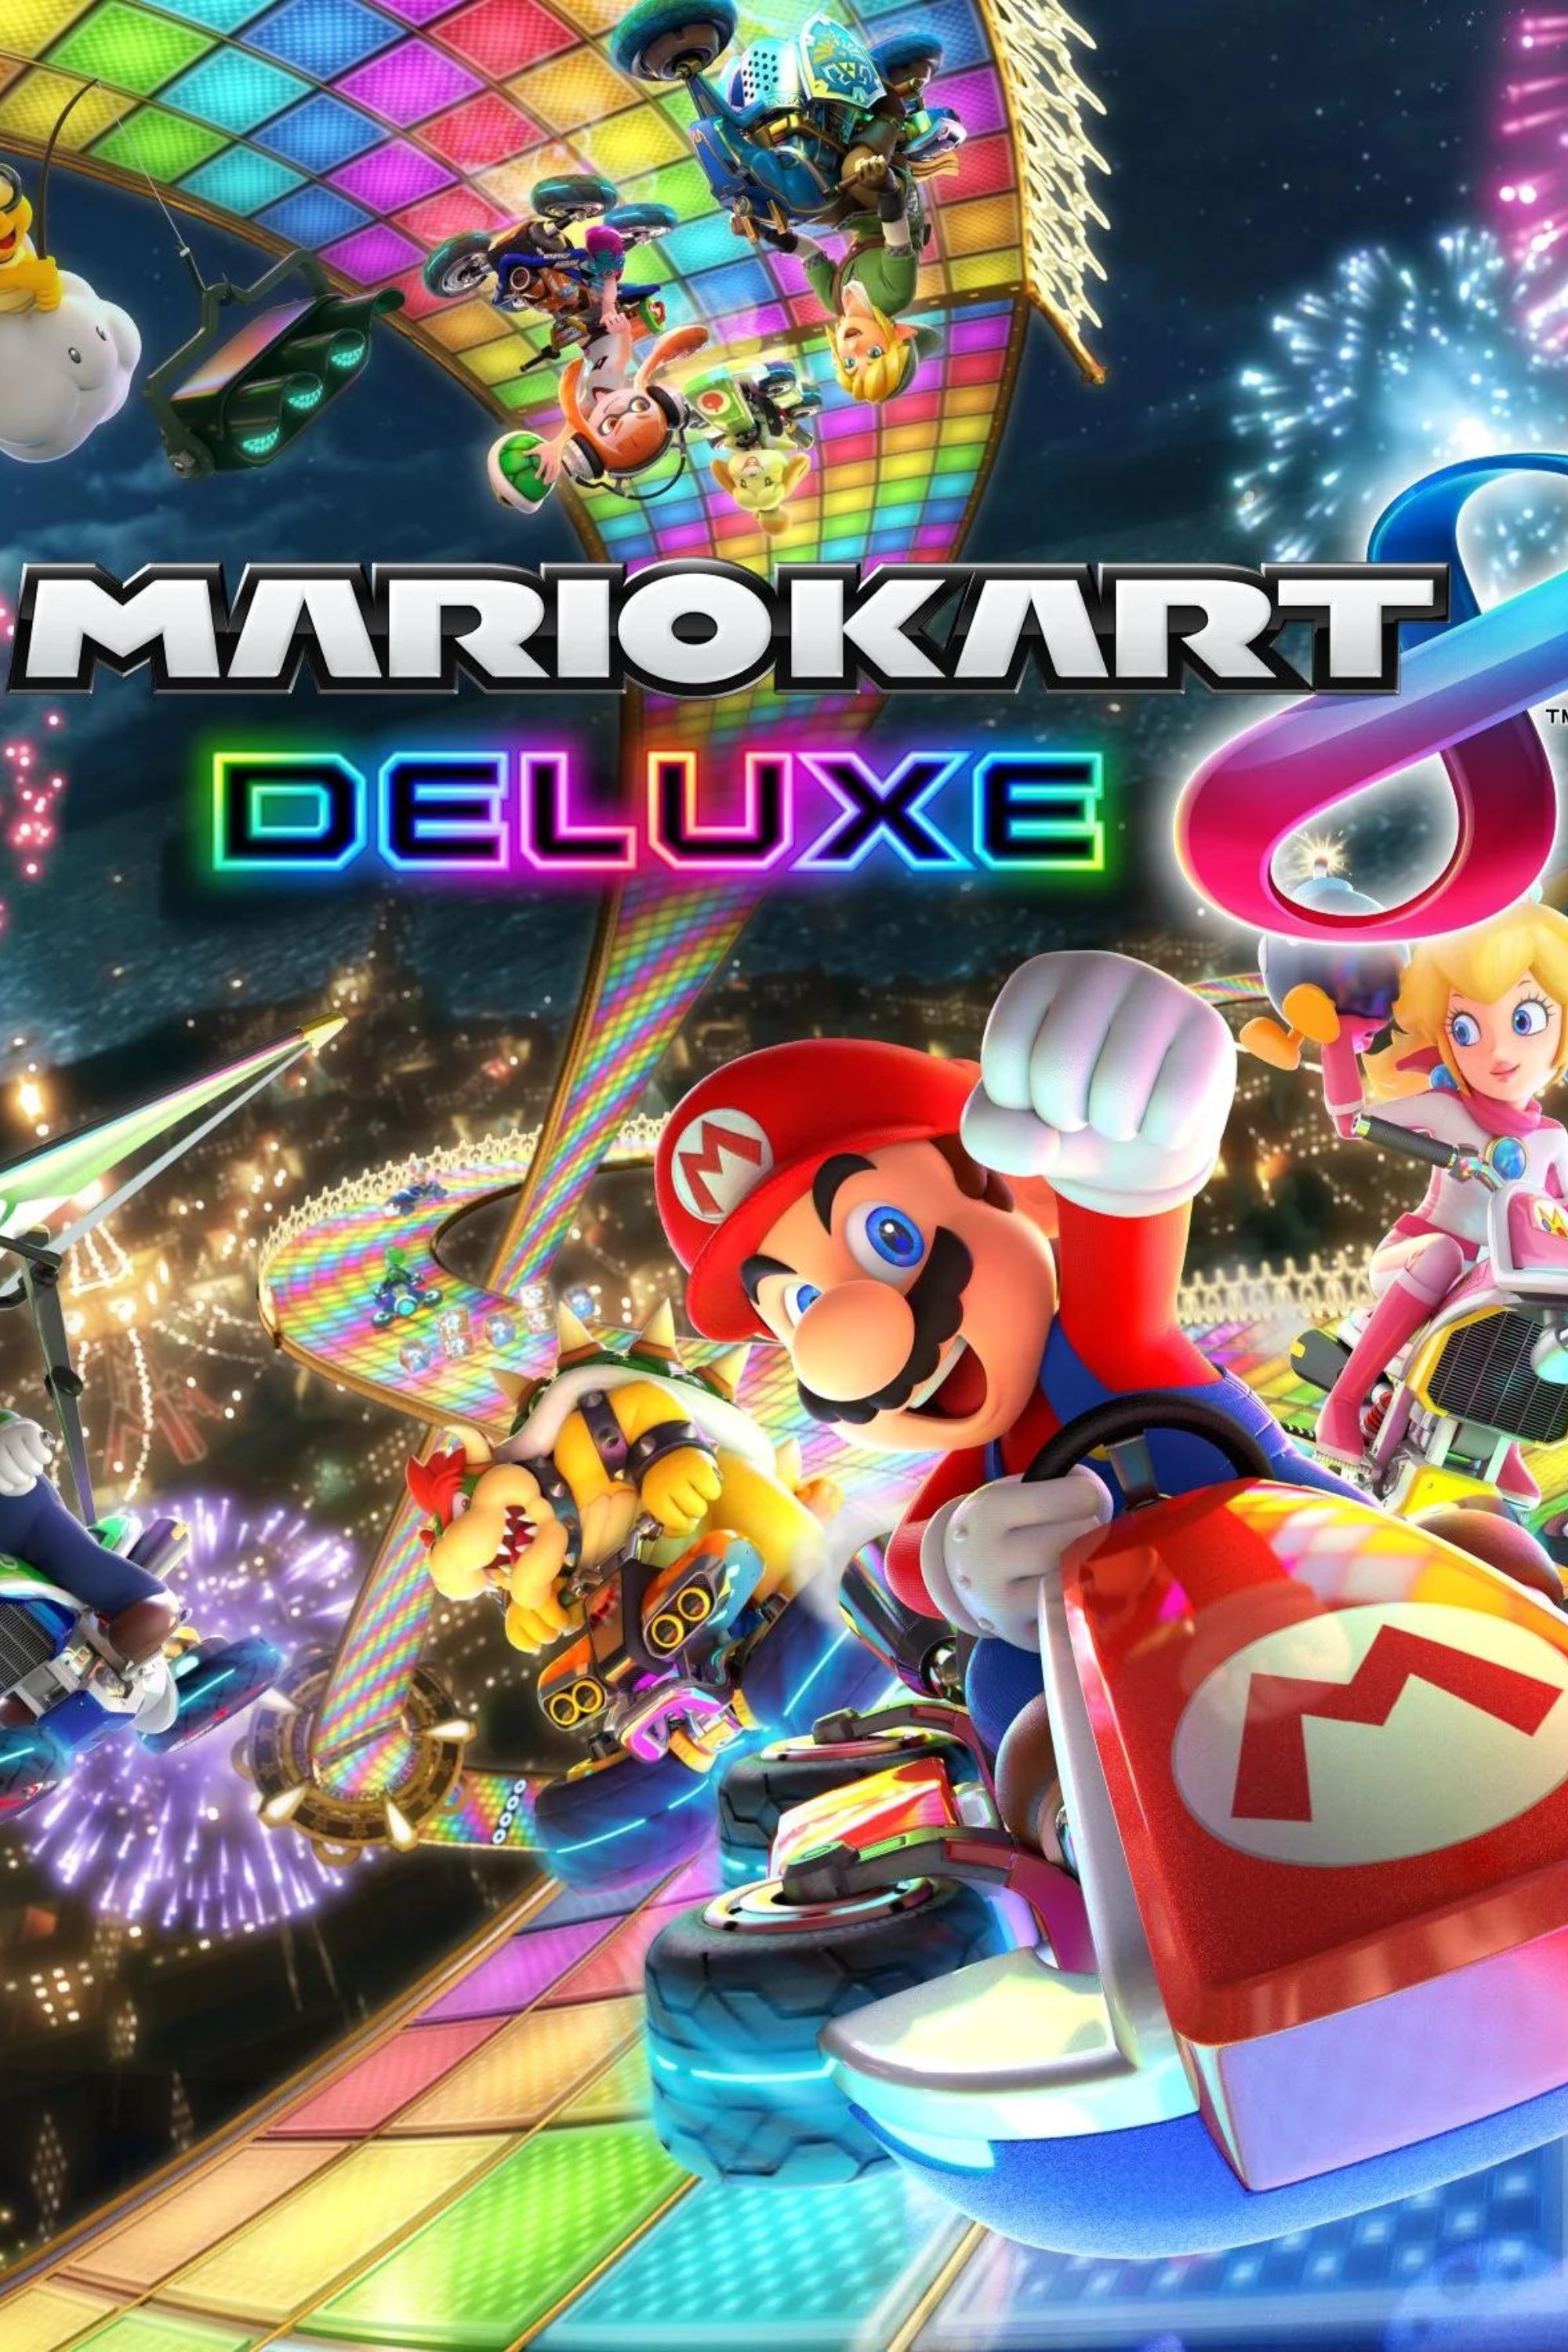 Product cover of Mario Kart 8 for the Nintendo Switch